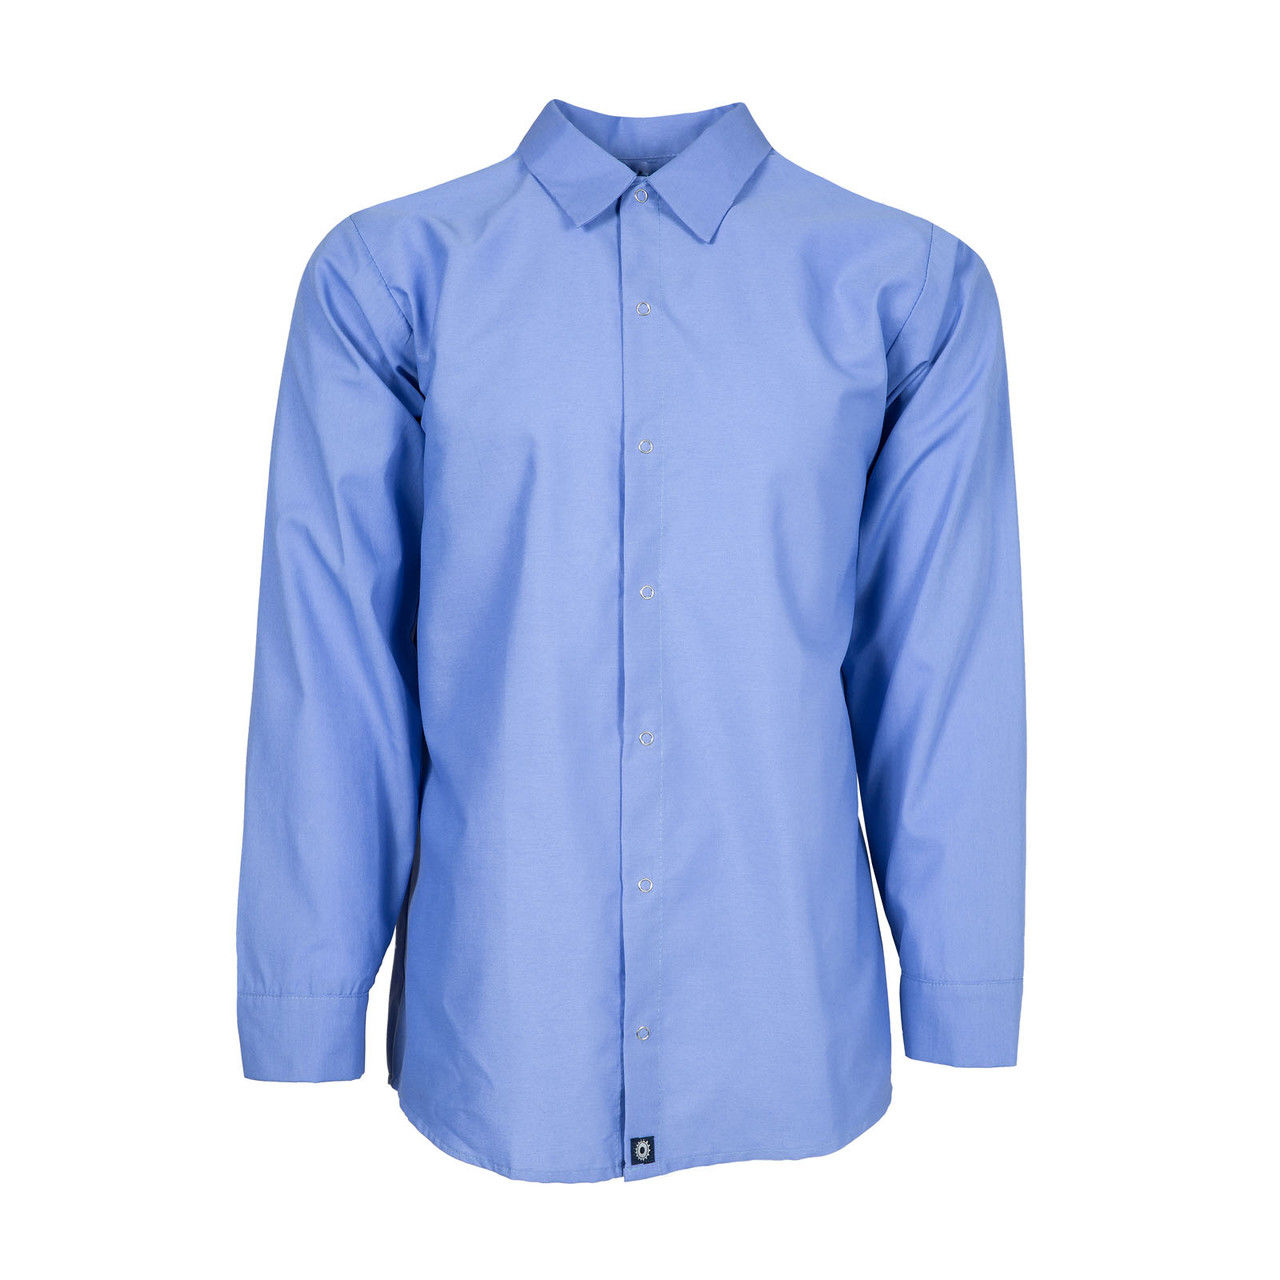 For whom is this blue work shirt womens, in Gulf Blue, particularly suitable?